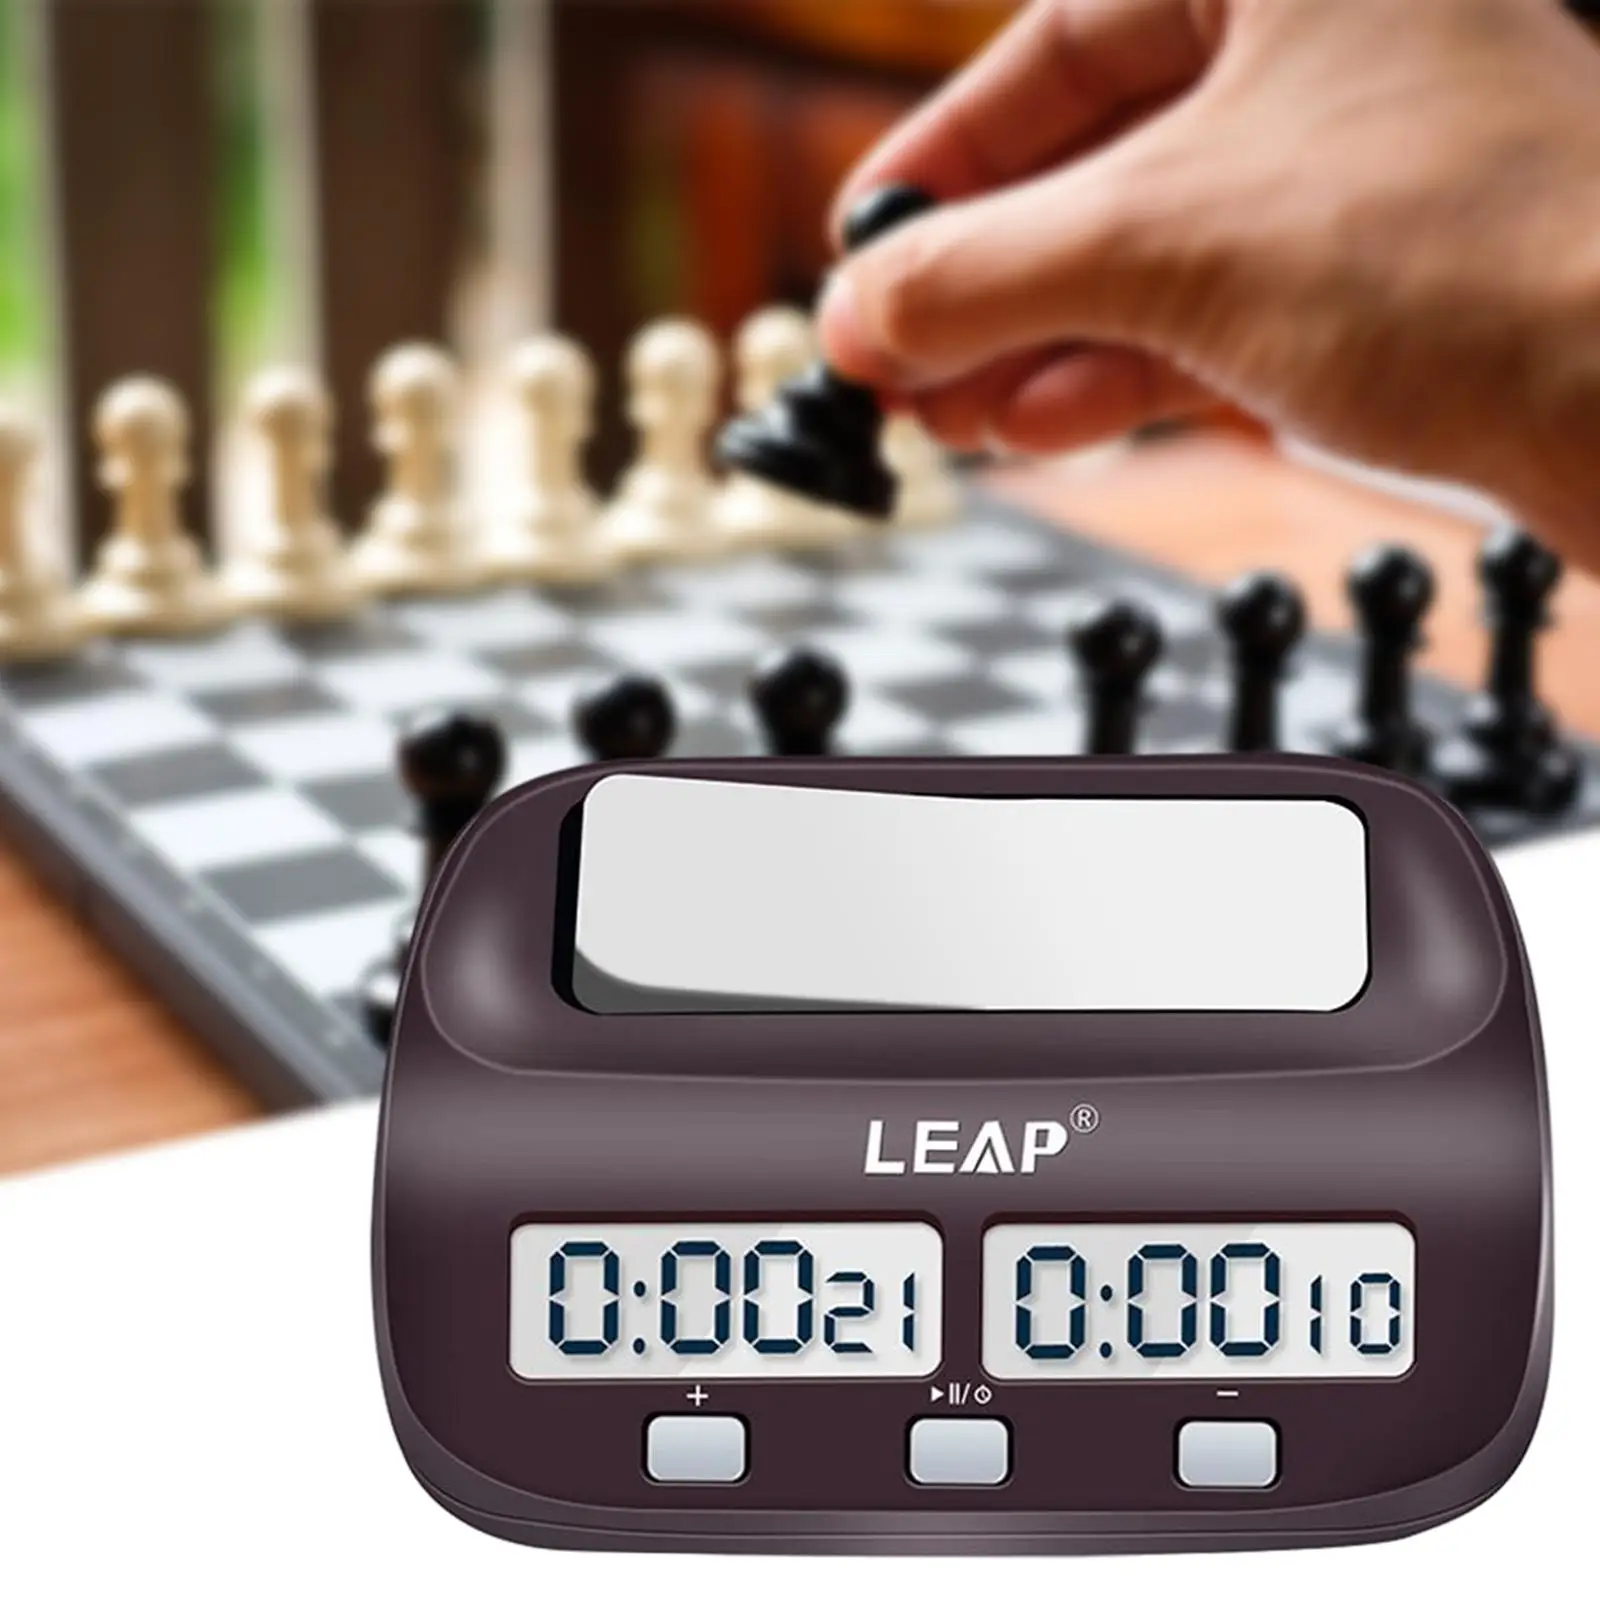 Chess Clock Timer Portable Count up Down Alarm Delay Function Chess Timer for Game